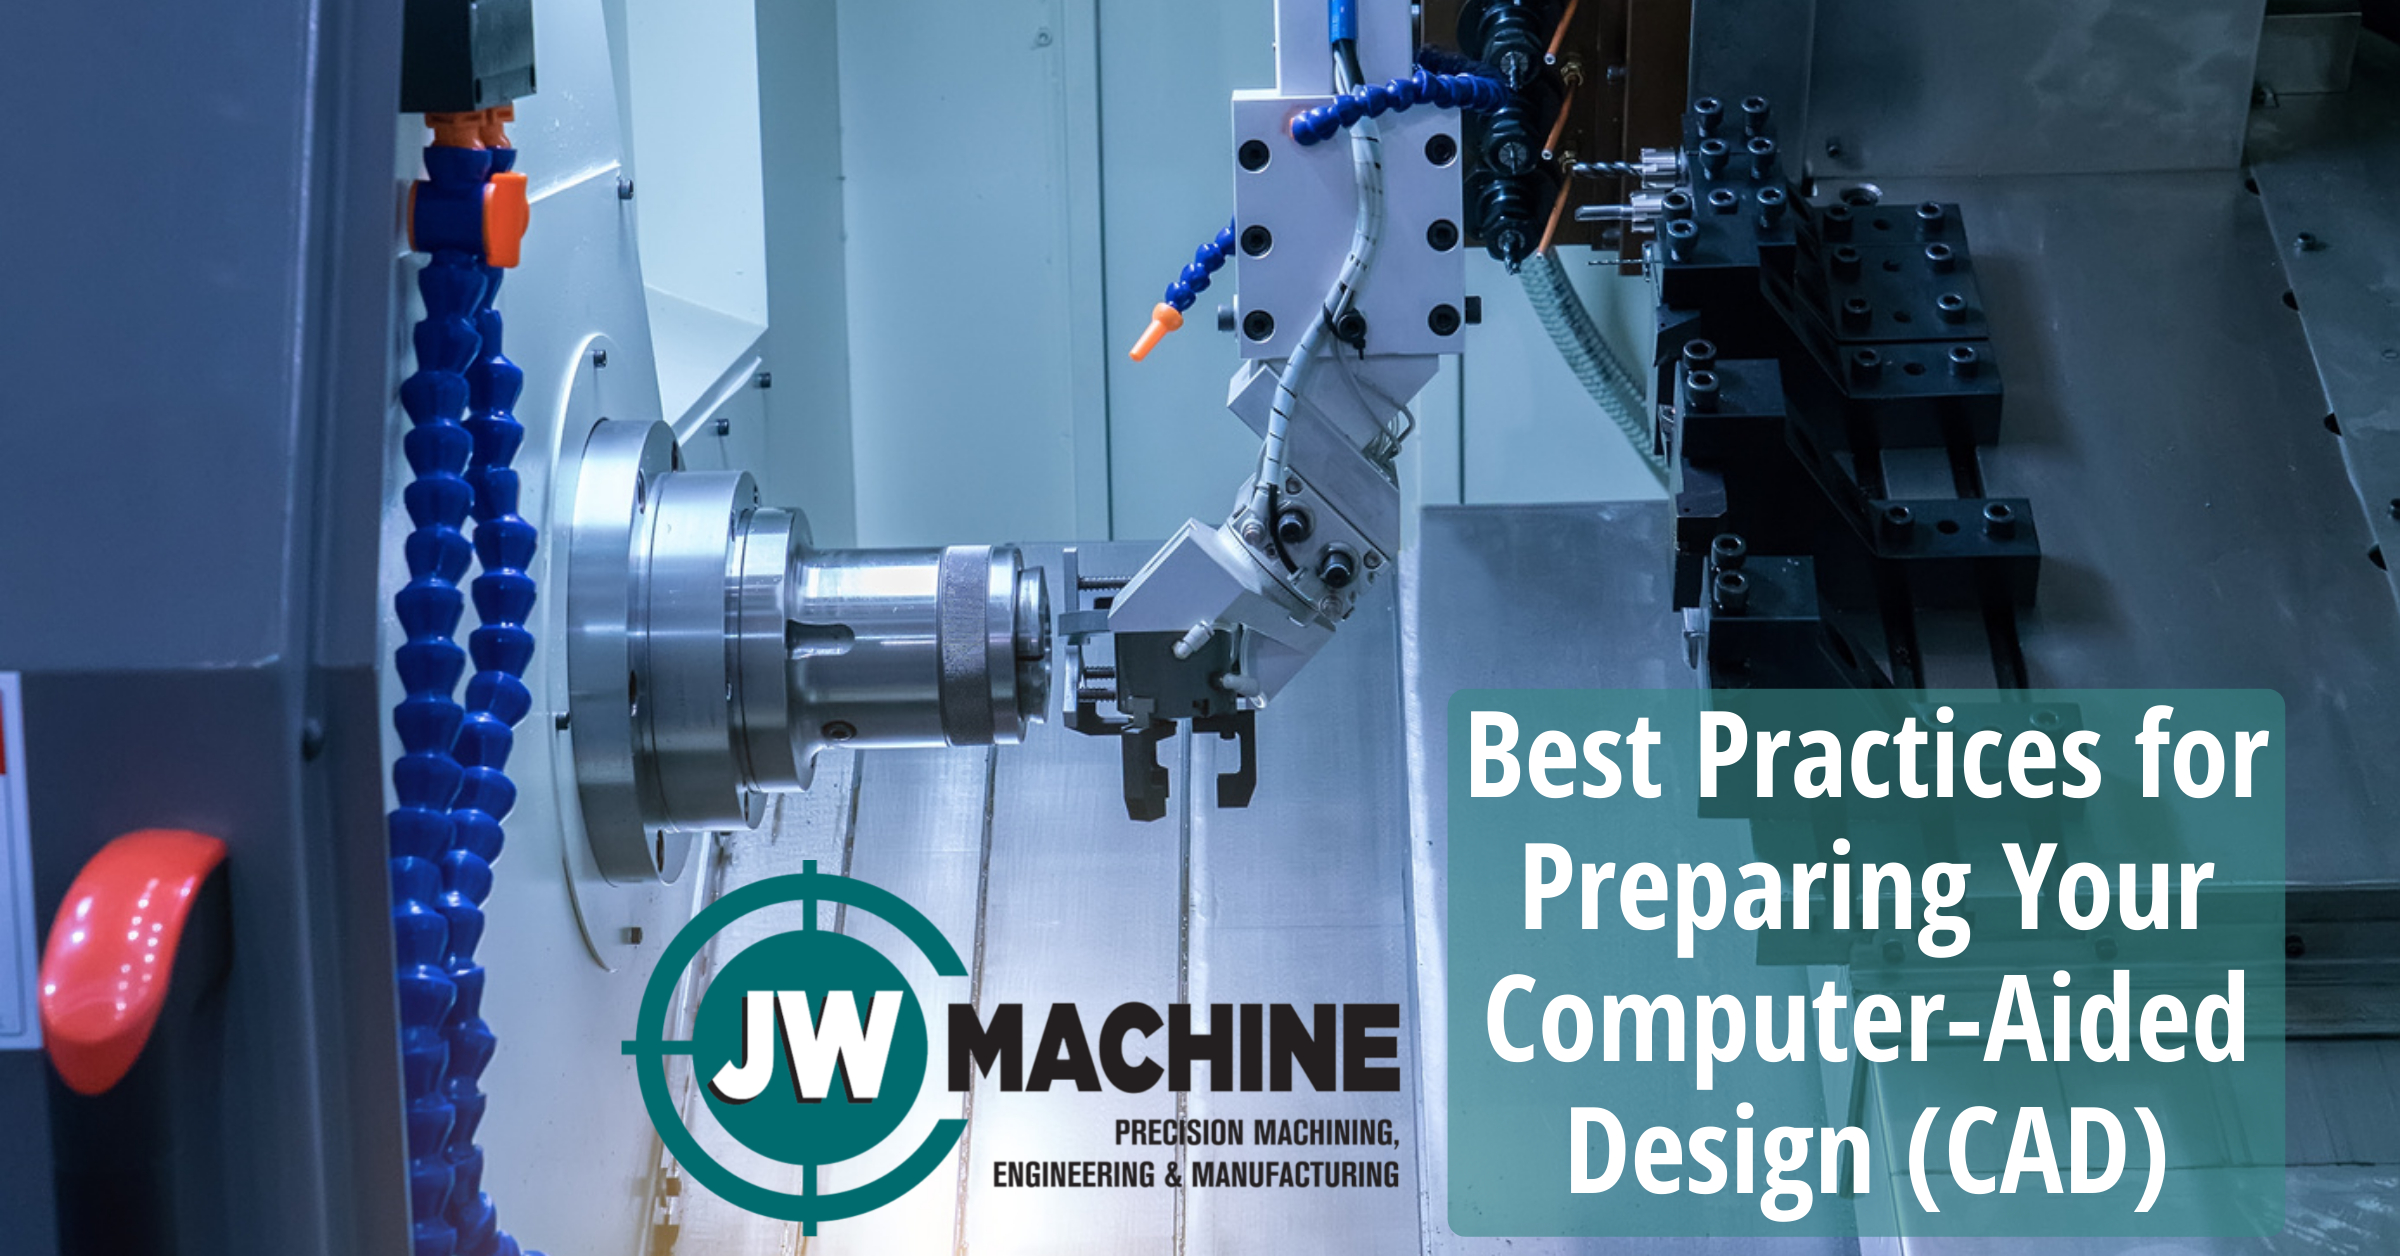 Best Practices for Preparing Your Computer-Aided Design (CAD)